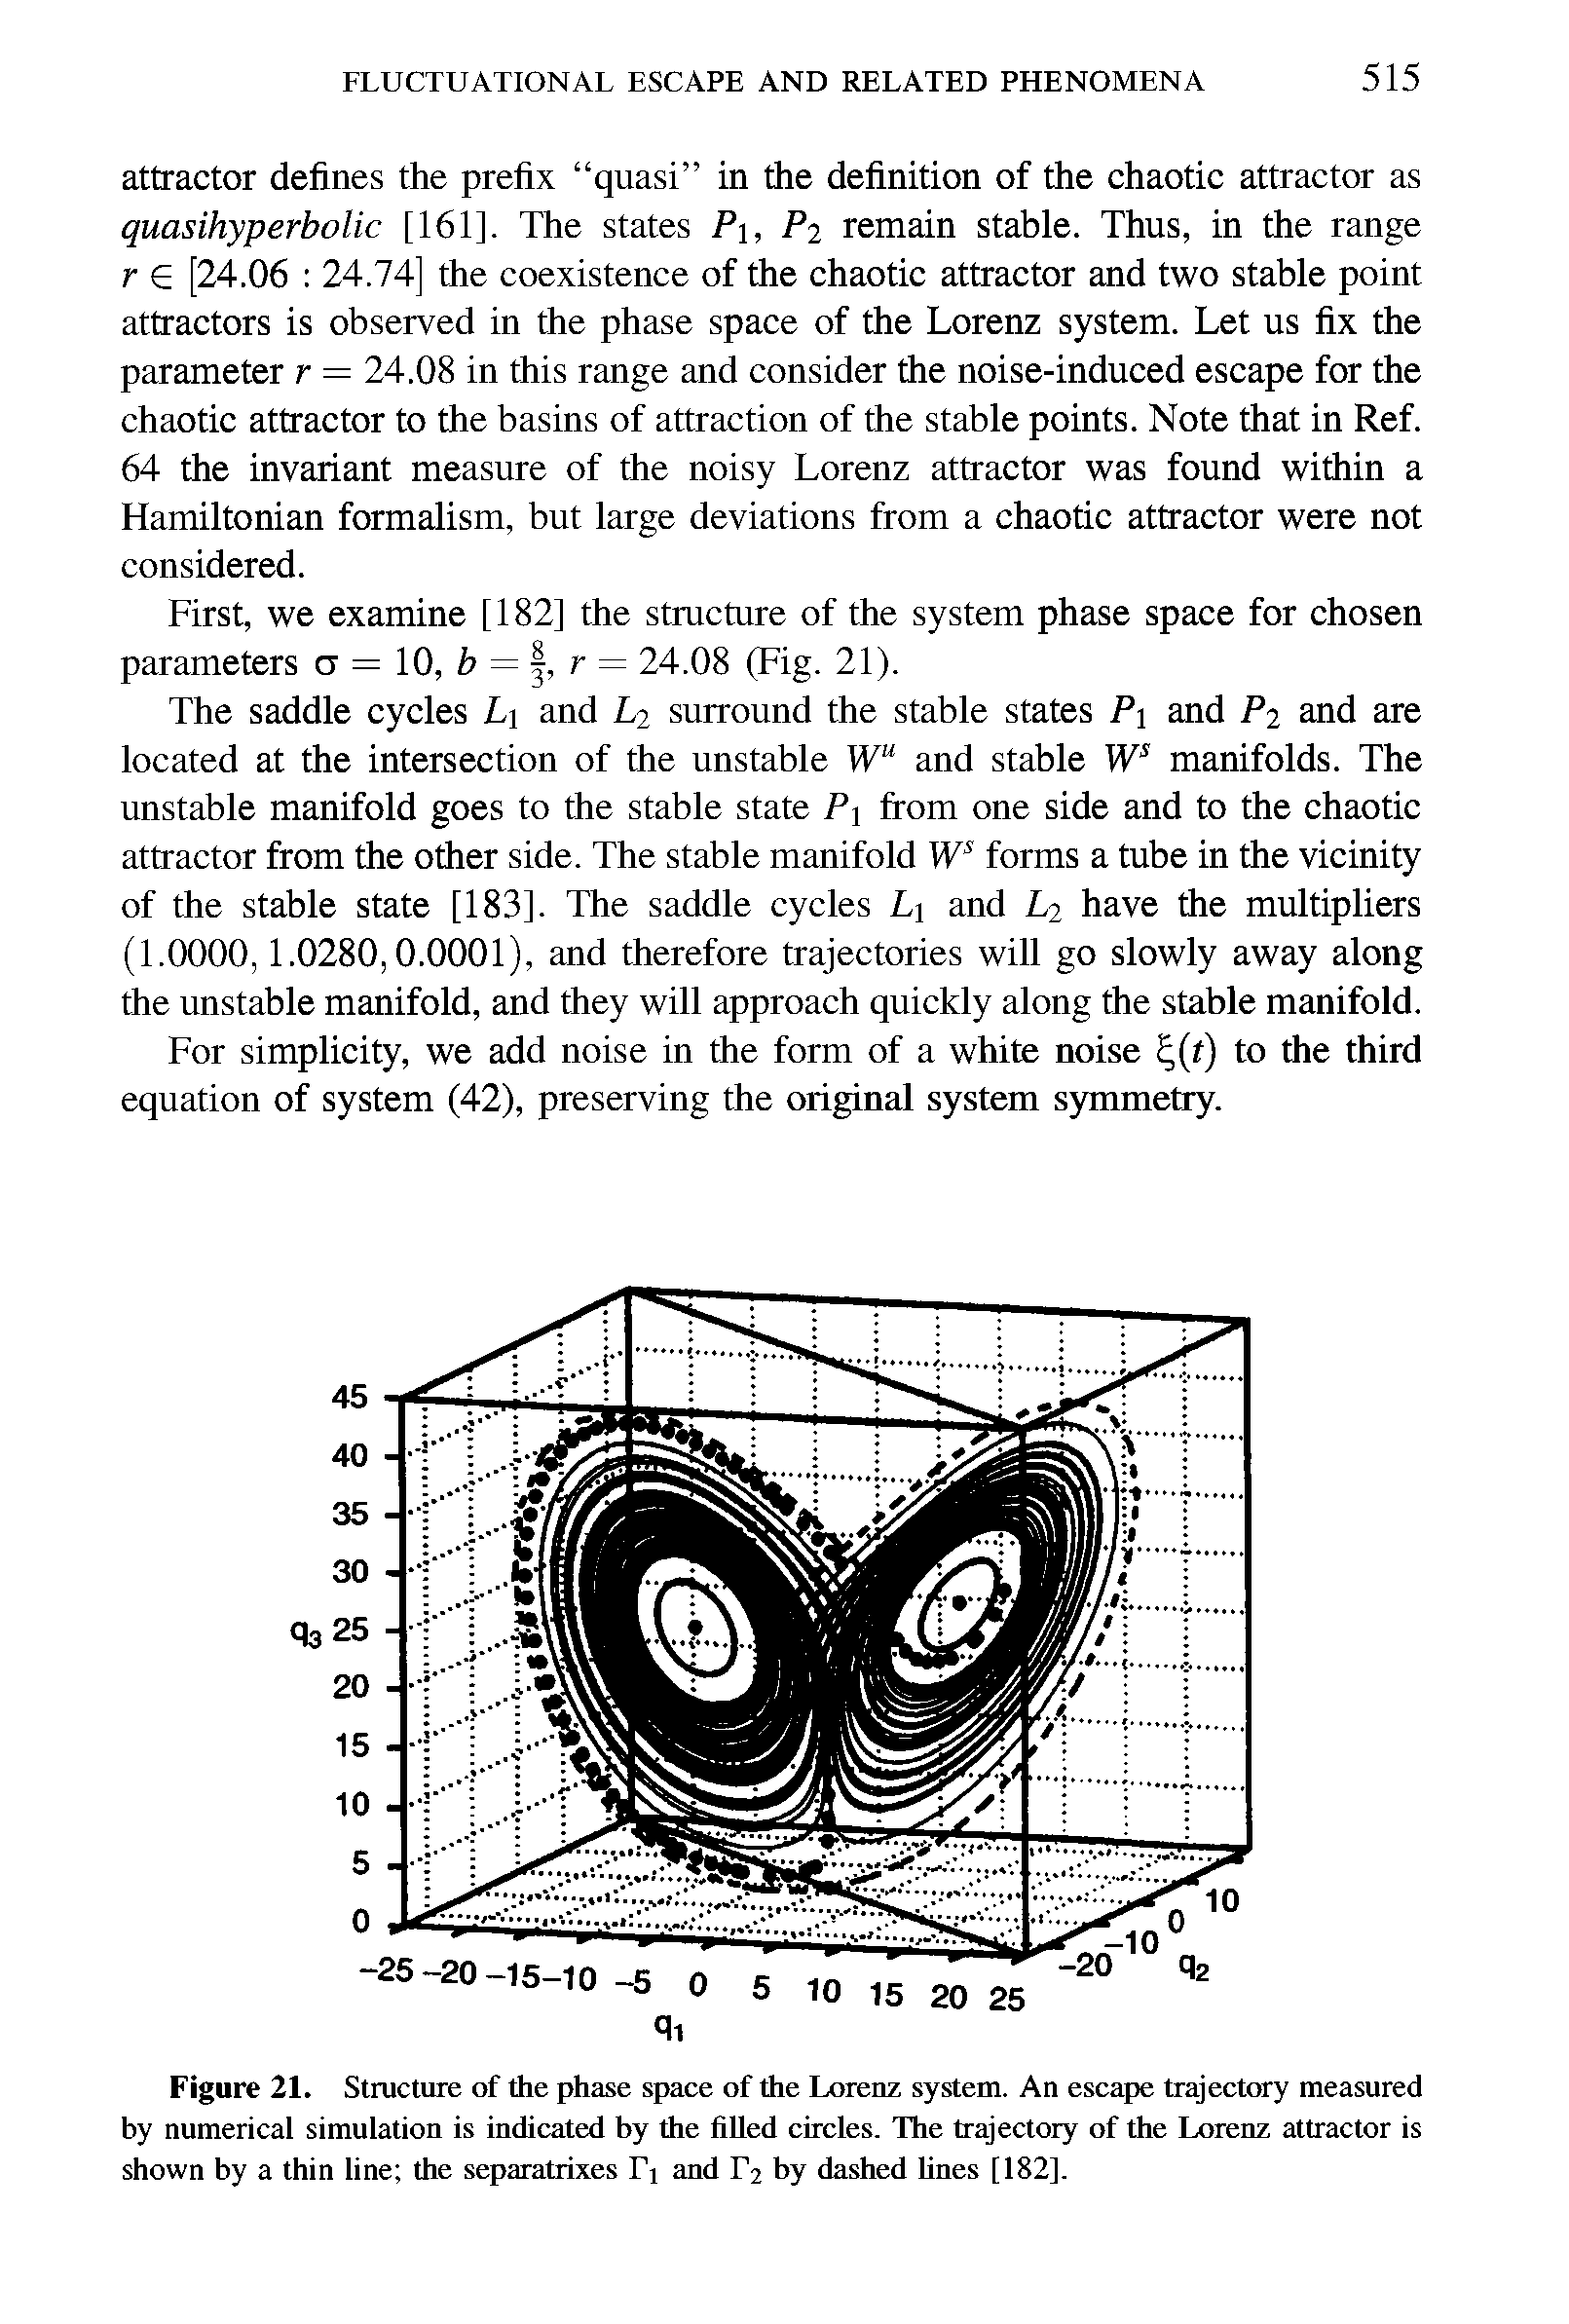 Figure 21. Structure of the phase space of the Lorenz system. An escape trajectory measured by numerical simulation is indicated by the filled circles. The trajectory of the Lorenz attractor is shown by a thin line the separatrixes T and T2 by dashed lines [182].